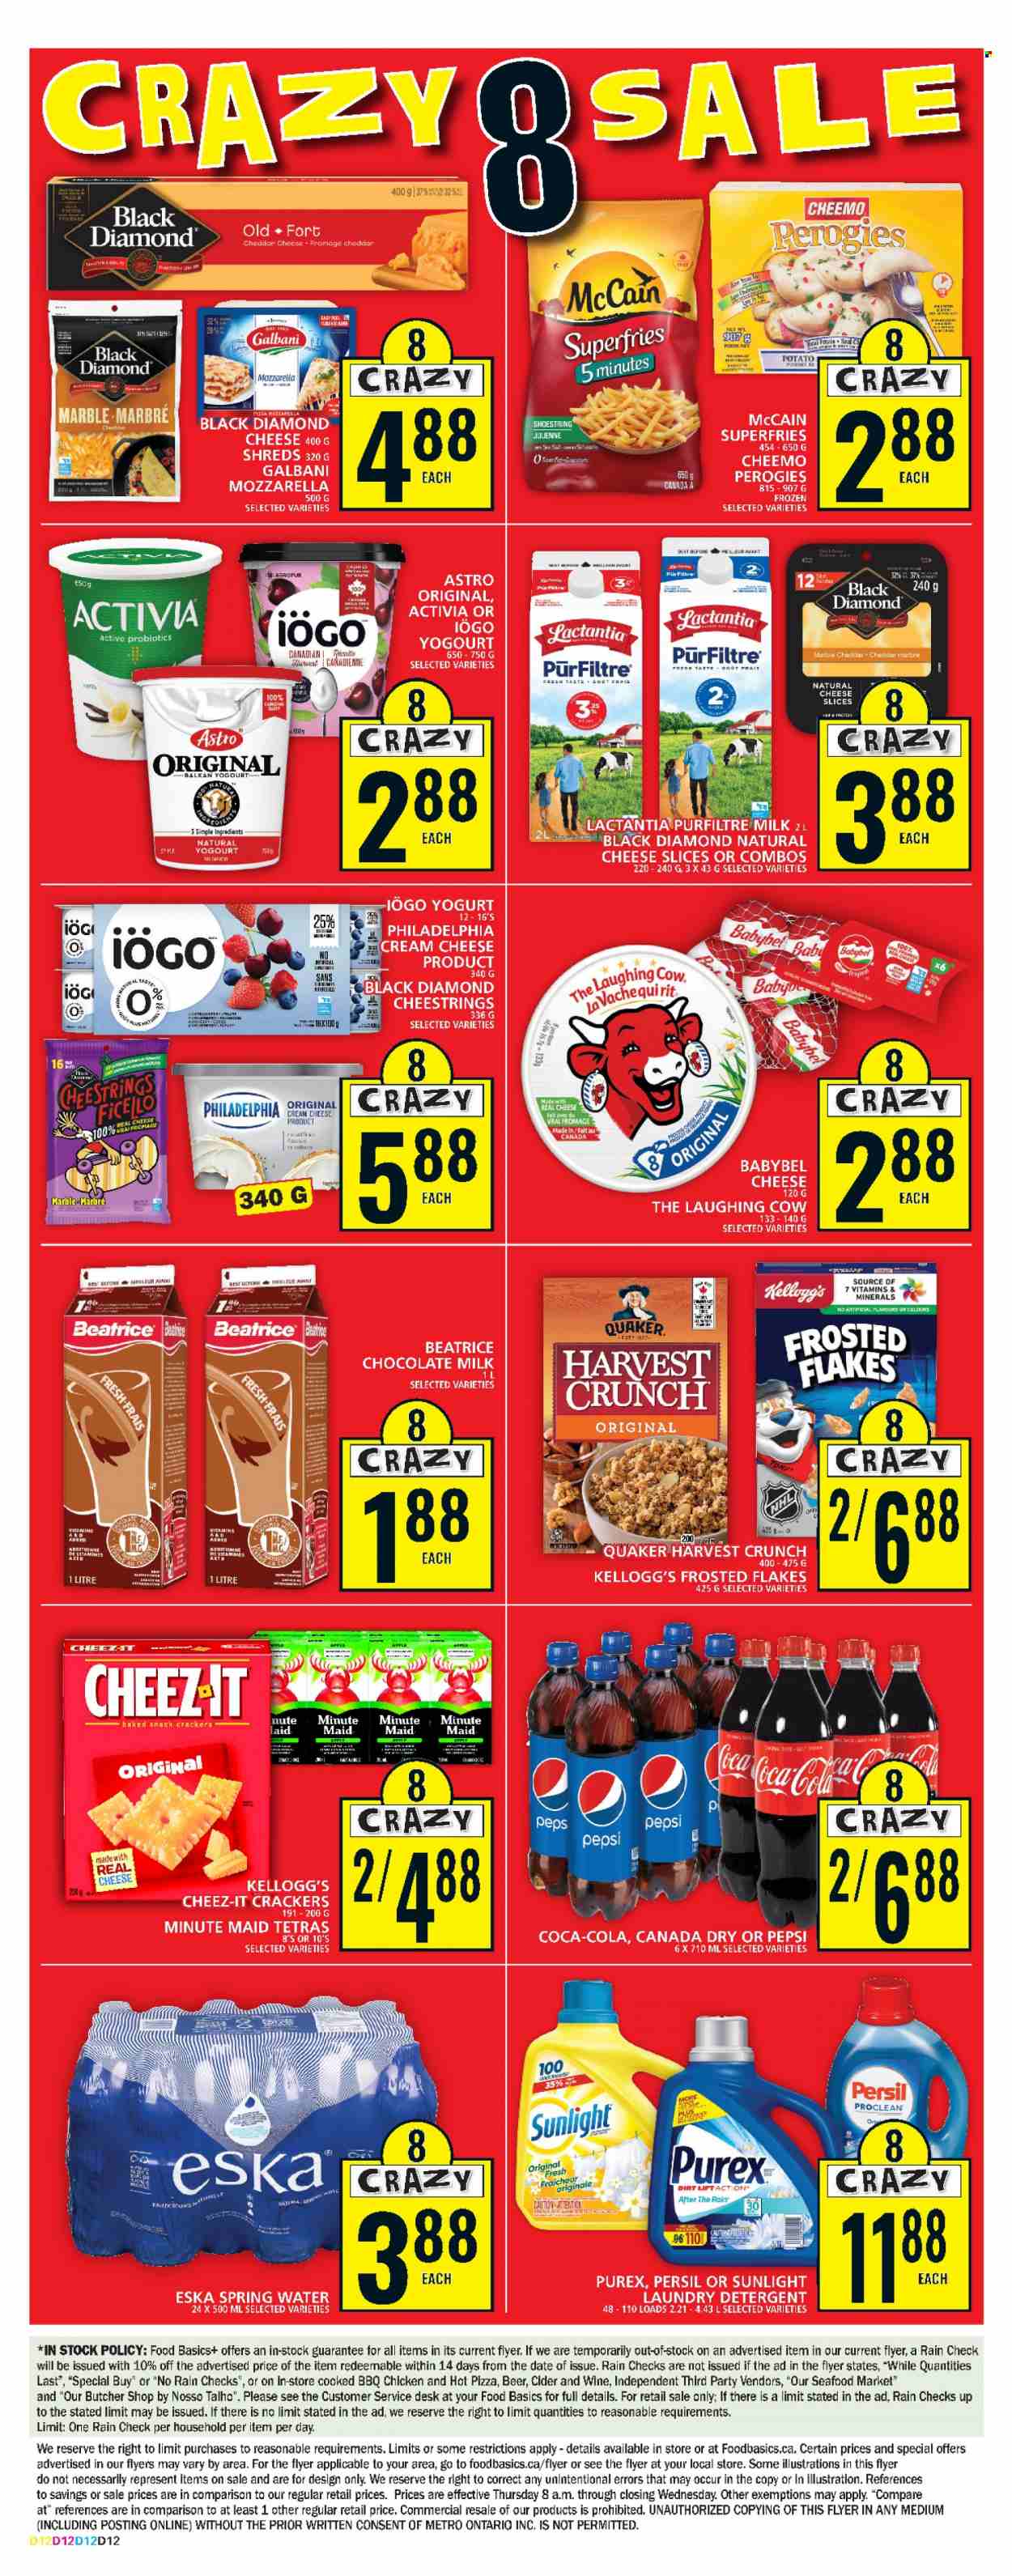 thumbnail - Food Basics Flyer - March 23, 2023 - March 29, 2023 - Sales products - seafood, pizza, Quaker, cream cheese, sliced cheese, string cheese, cheese, The Laughing Cow, Galbani, Babybel, yoghurt, Activia, milk, McCain, potato fries, milk chocolate, crackers, Kellogg's, Cheez-It, Frosted Flakes, Canada Dry, Coca-Cola, Pepsi, fruit punch, spring water, water, wine, cider, beer, chicken, Persil, laundry detergent, Sunlight, Purex, probiotics, detergent, Philadelphia. Page 2.